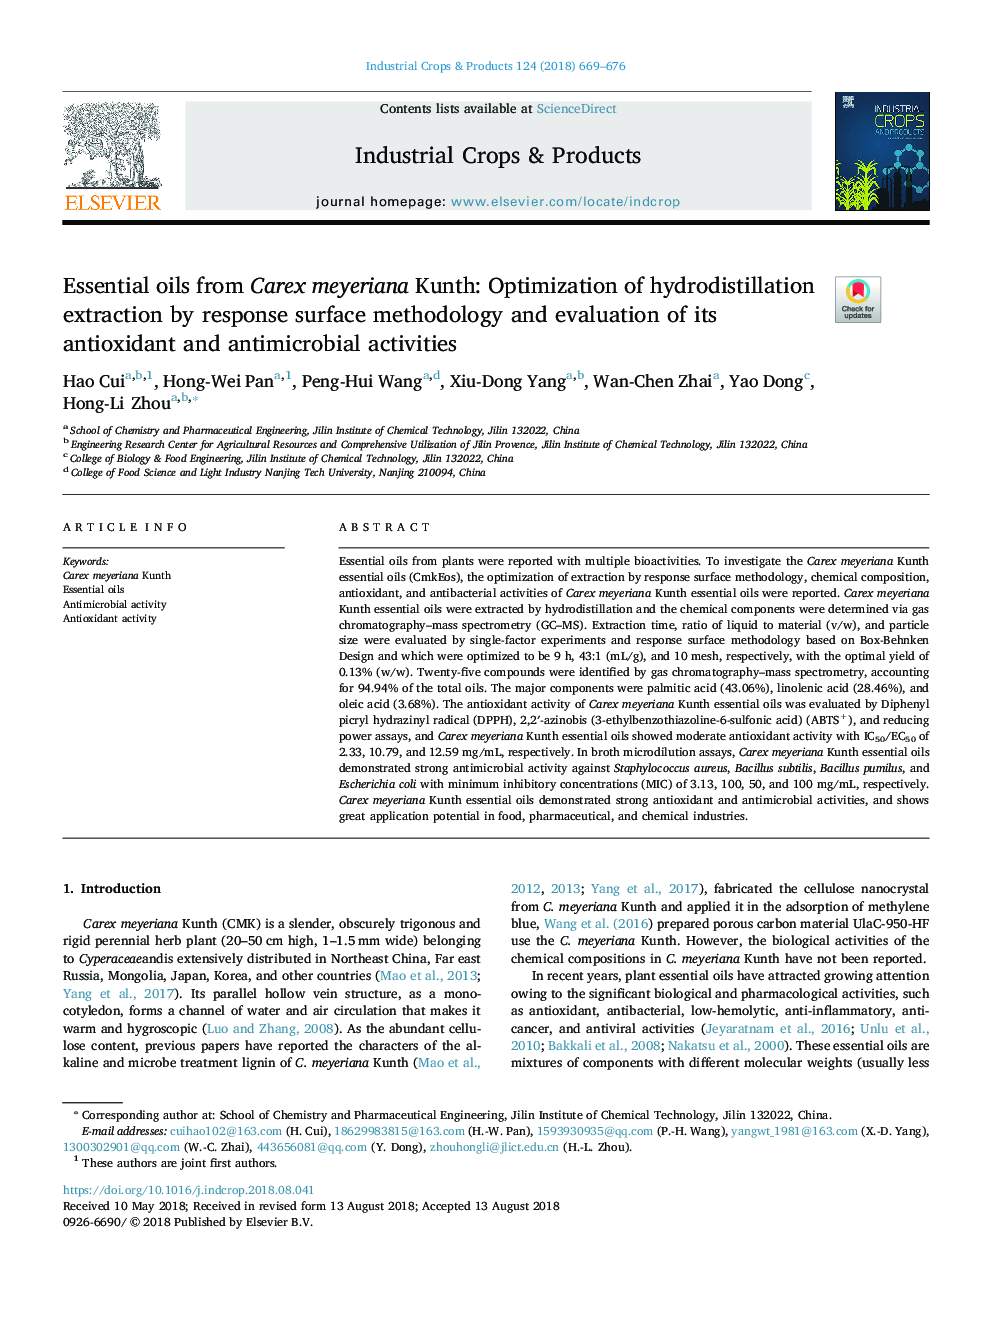 Essential oils from Carex meyeriana Kunth: Optimization of hydrodistillation extraction by response surface methodology and evaluation of its antioxidant and antimicrobial activities